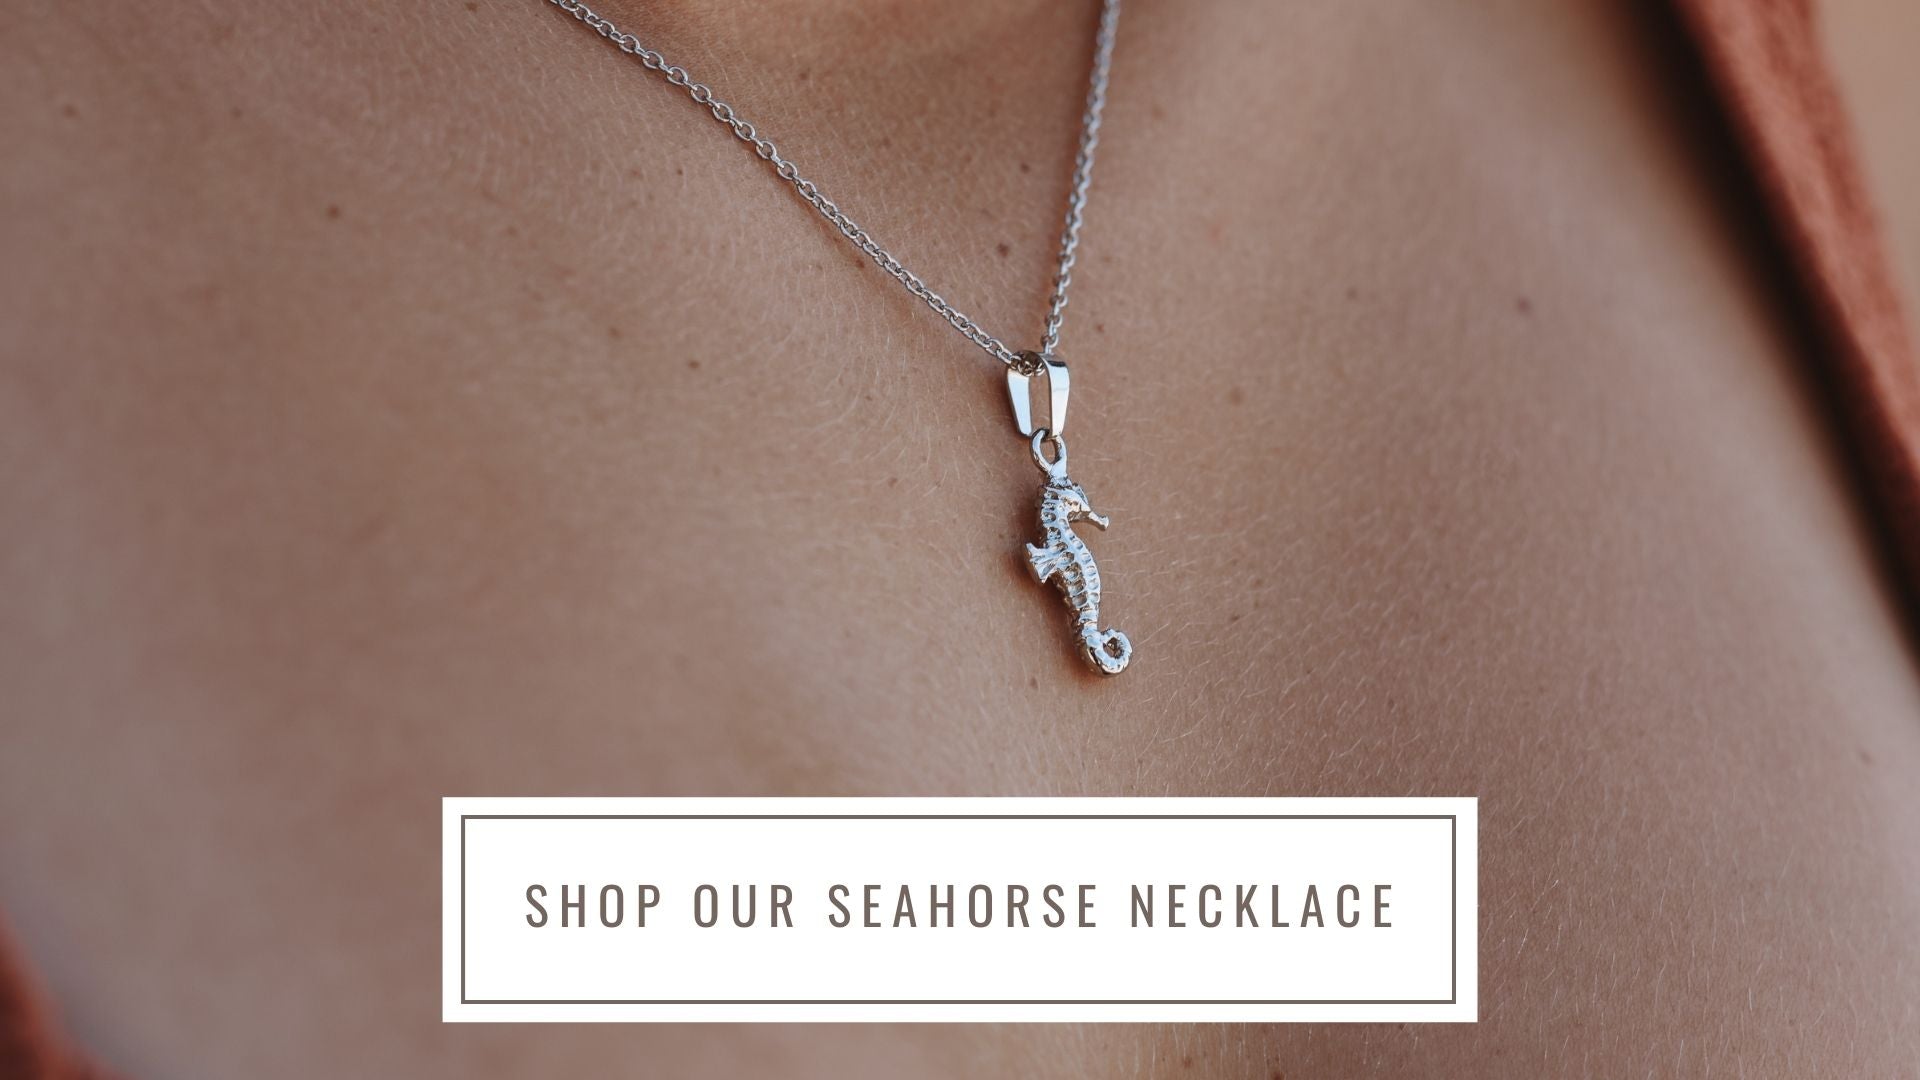 Seahorse Necklace Meaning